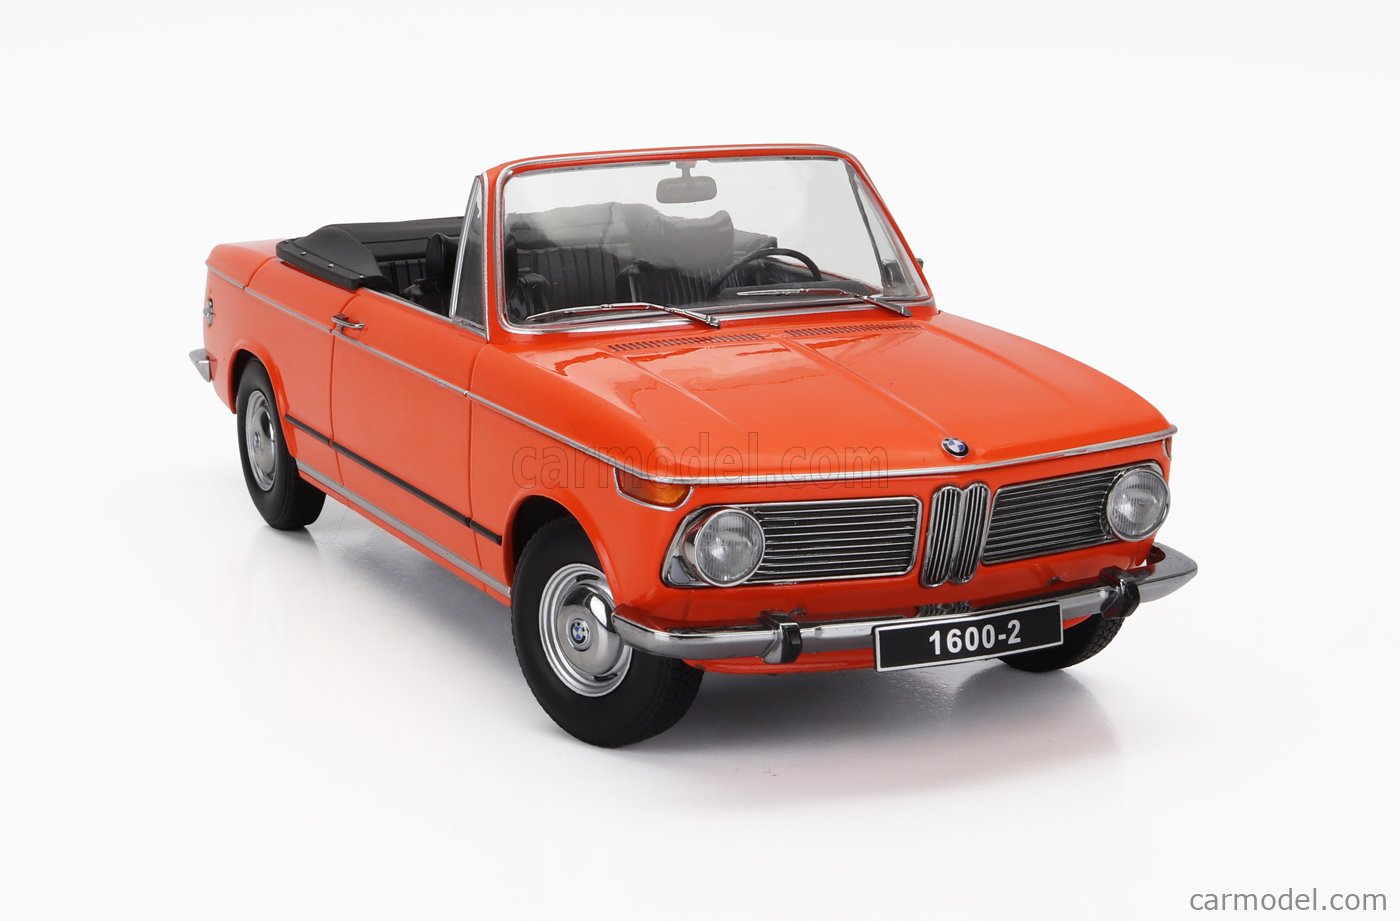 KK-SCALE KKDC181101 Scale 1/18 | BMW 1600-2 CABRIOLET 1968 - WITH